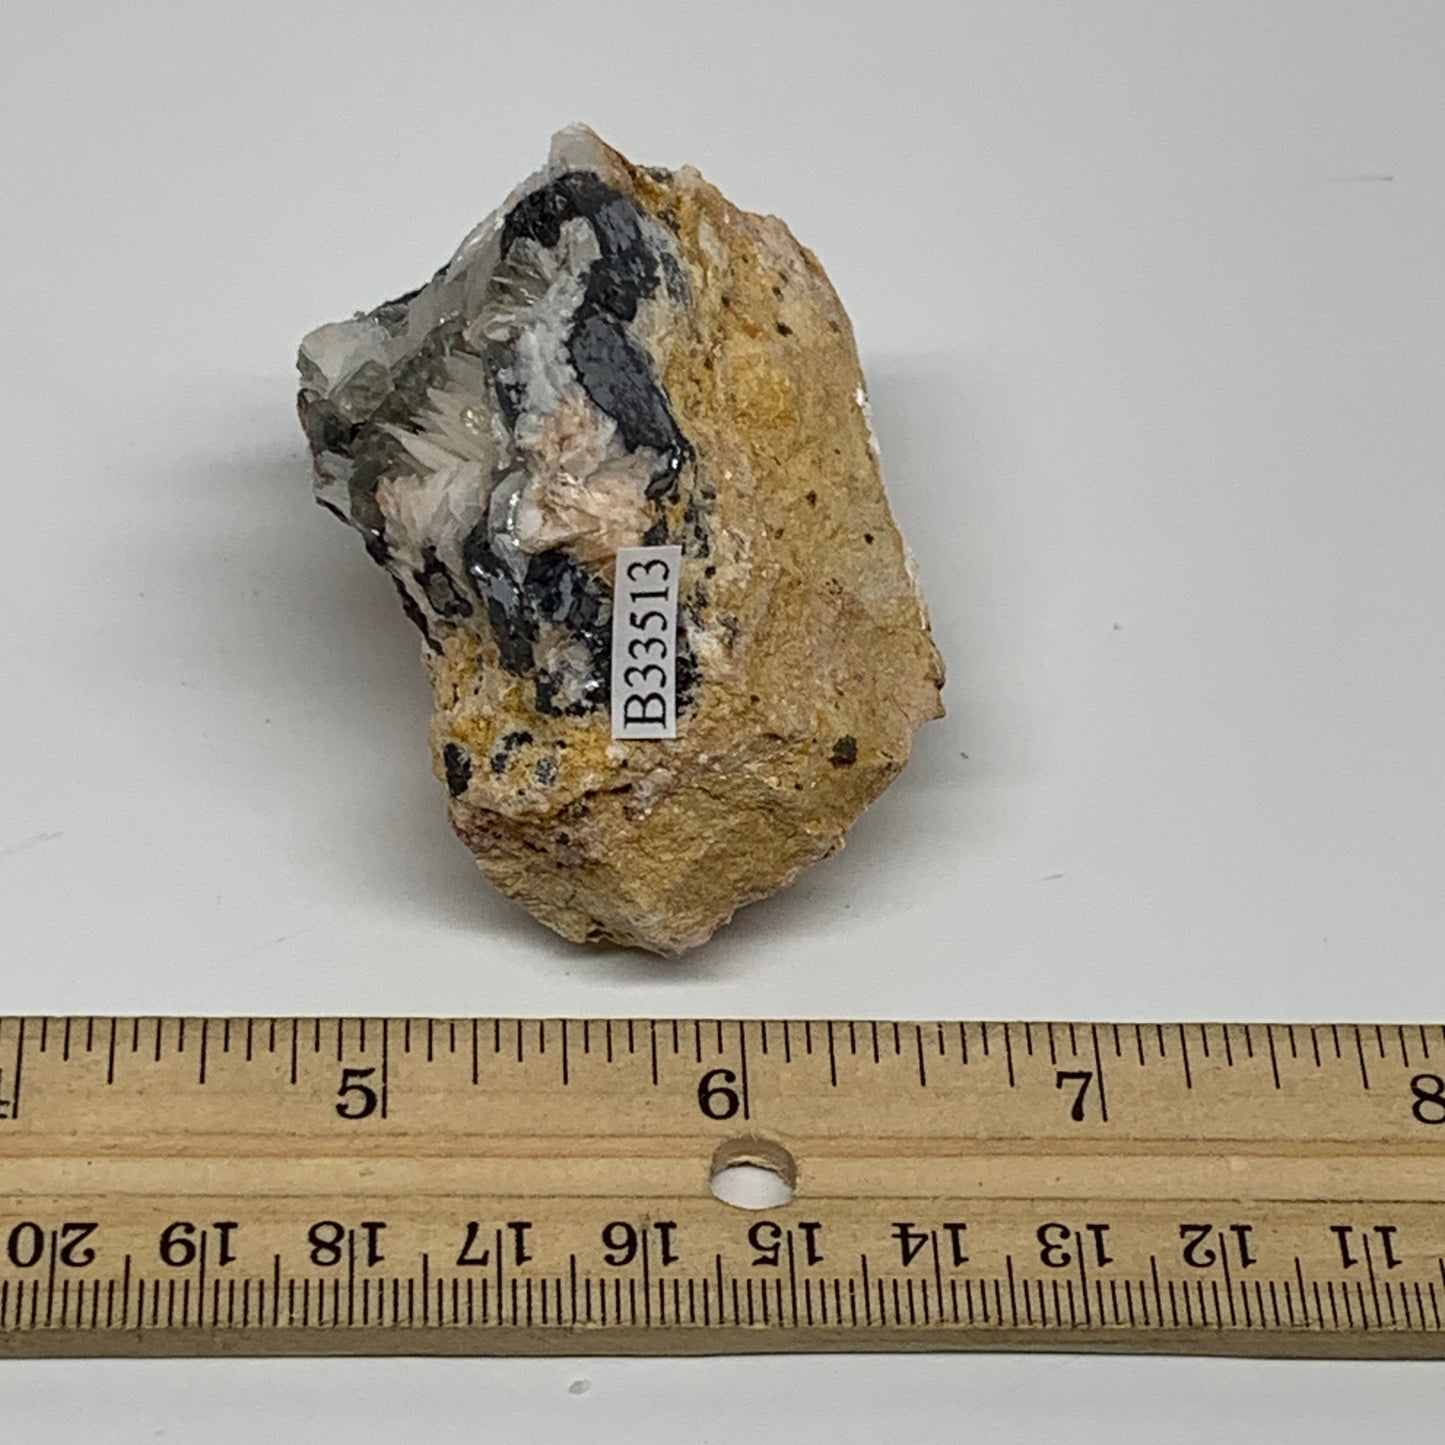 0.31 lbs, 2.4"x1.5"x1.7", Barite with Cerussite on Galena Mineral Specimen, B33513